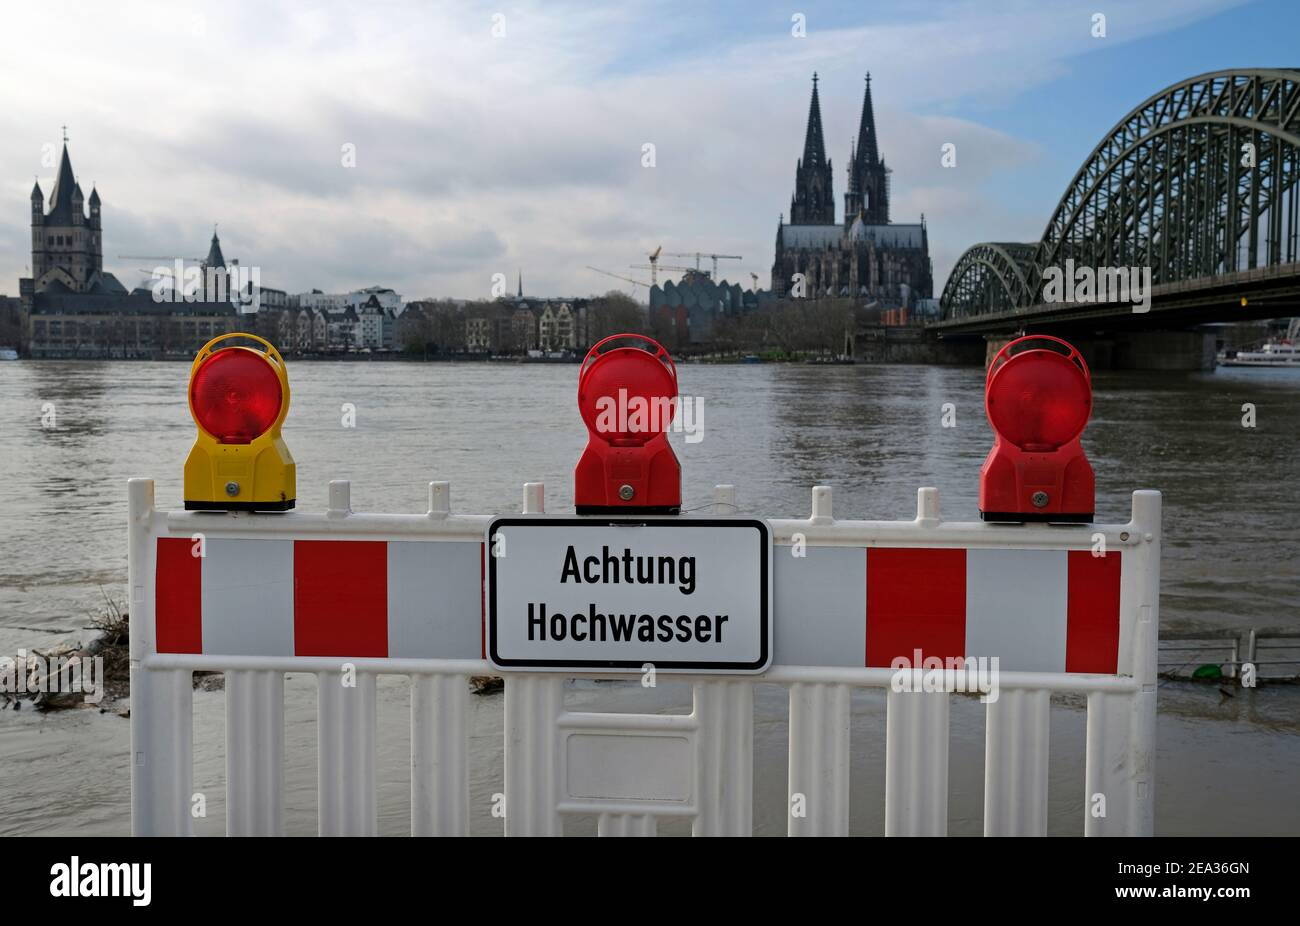 Extreme weather: Warning sign in German at the entrance to a flooded pedestrian zone in Cologne, Germany Stock Photo